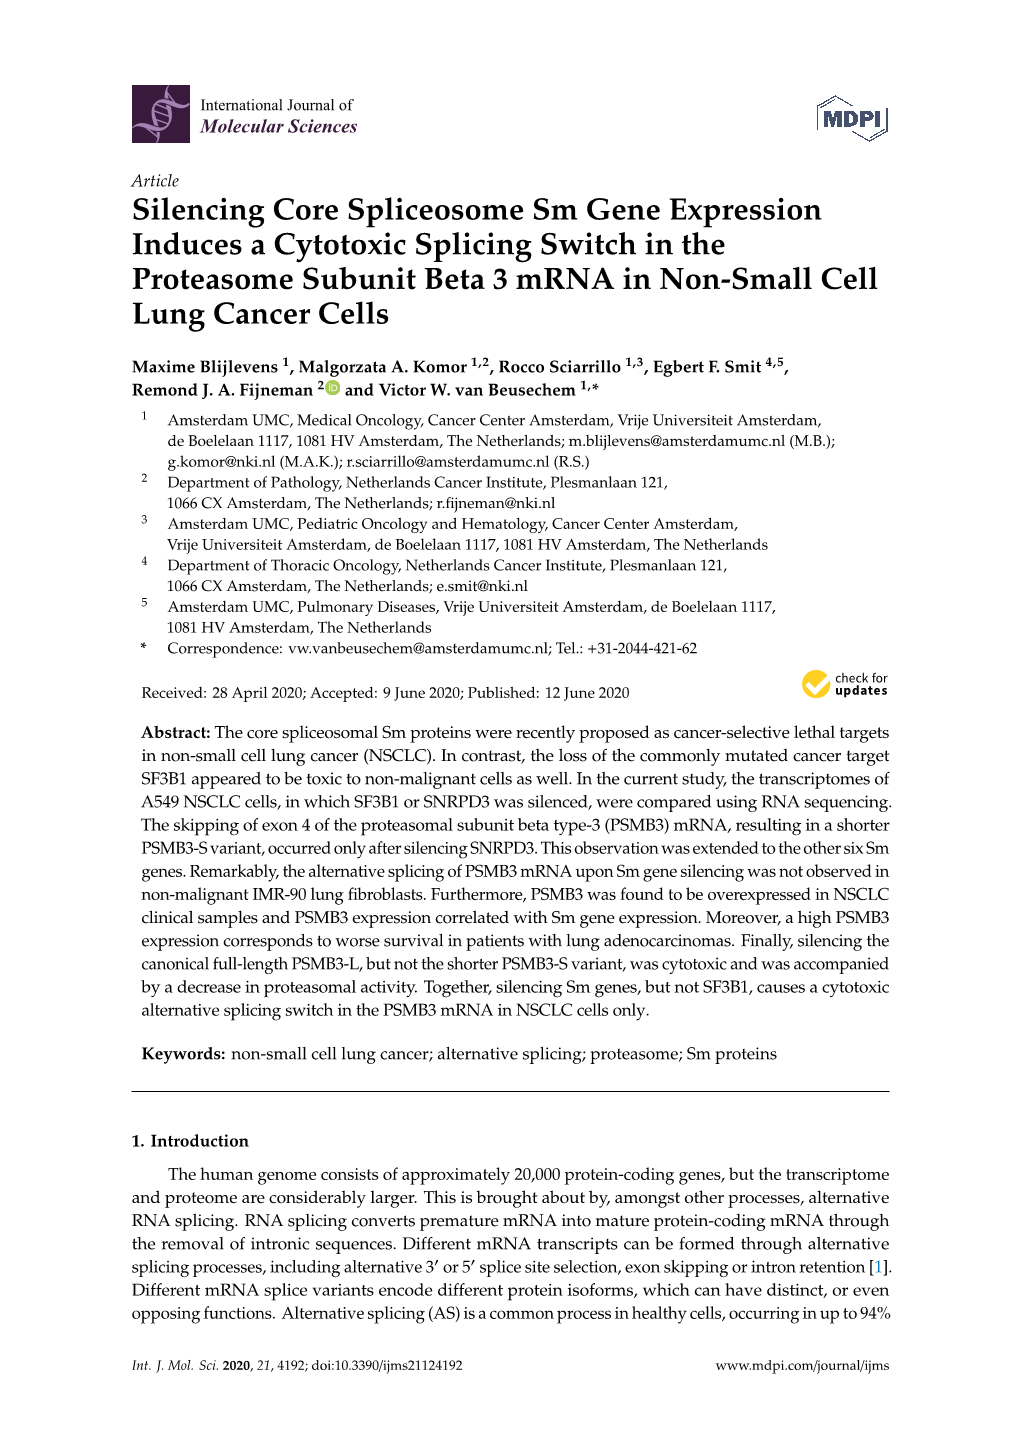 Silencing Core Spliceosome Sm Gene Expression Induces a Cytotoxic Splicing Switch in the Proteasome Subunit Beta 3 Mrna in Non-Small Cell Lung Cancer Cells